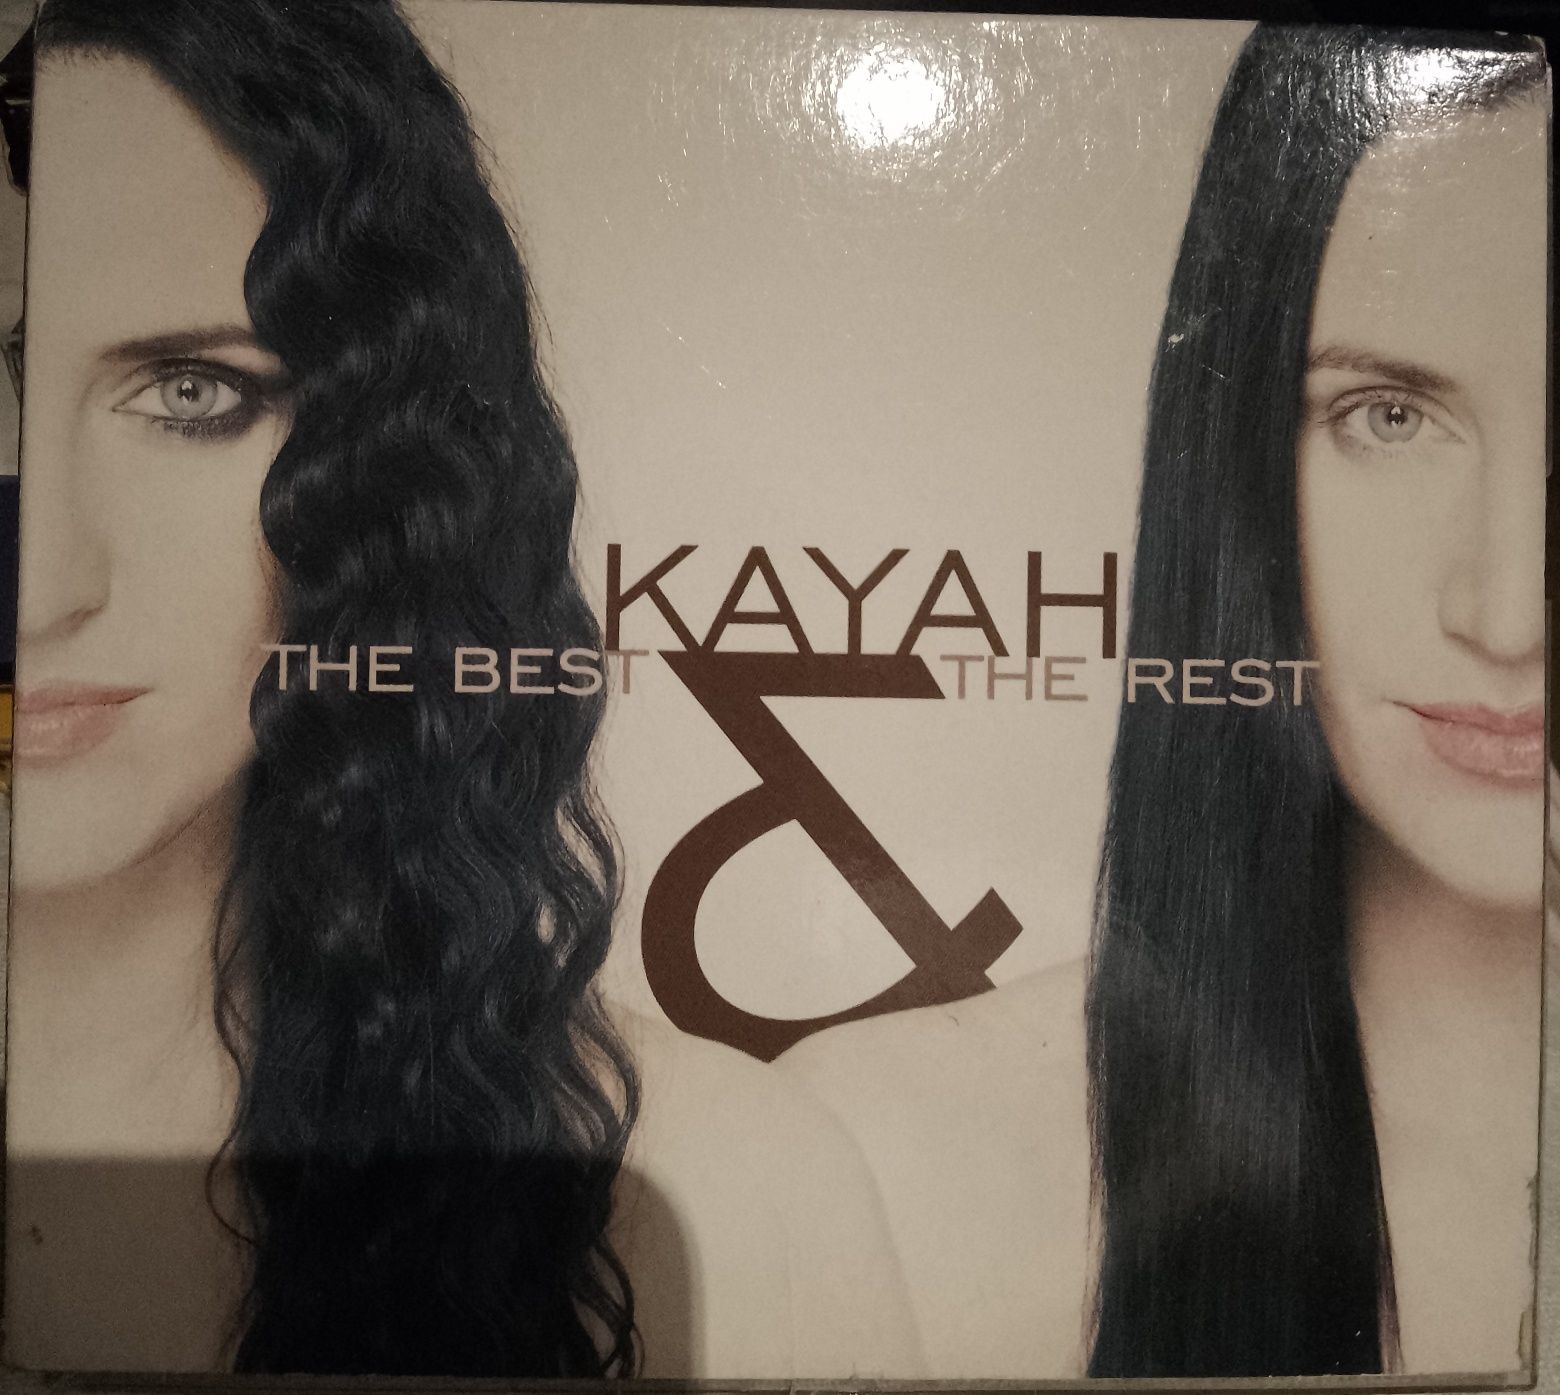 KAYAH the best & the rest